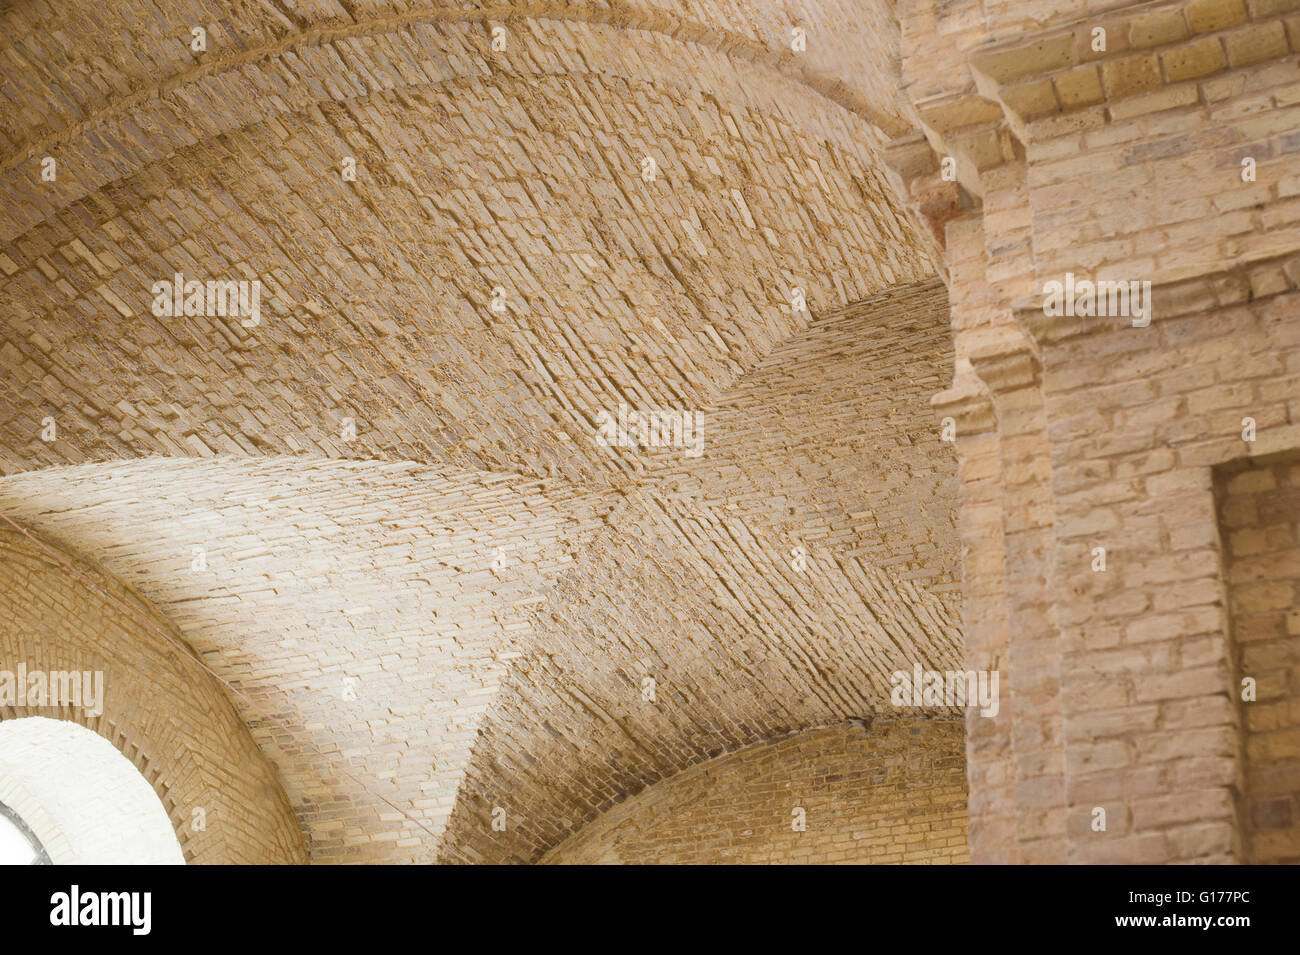 brick lancet arch ceiling in the fortress Stock Photo